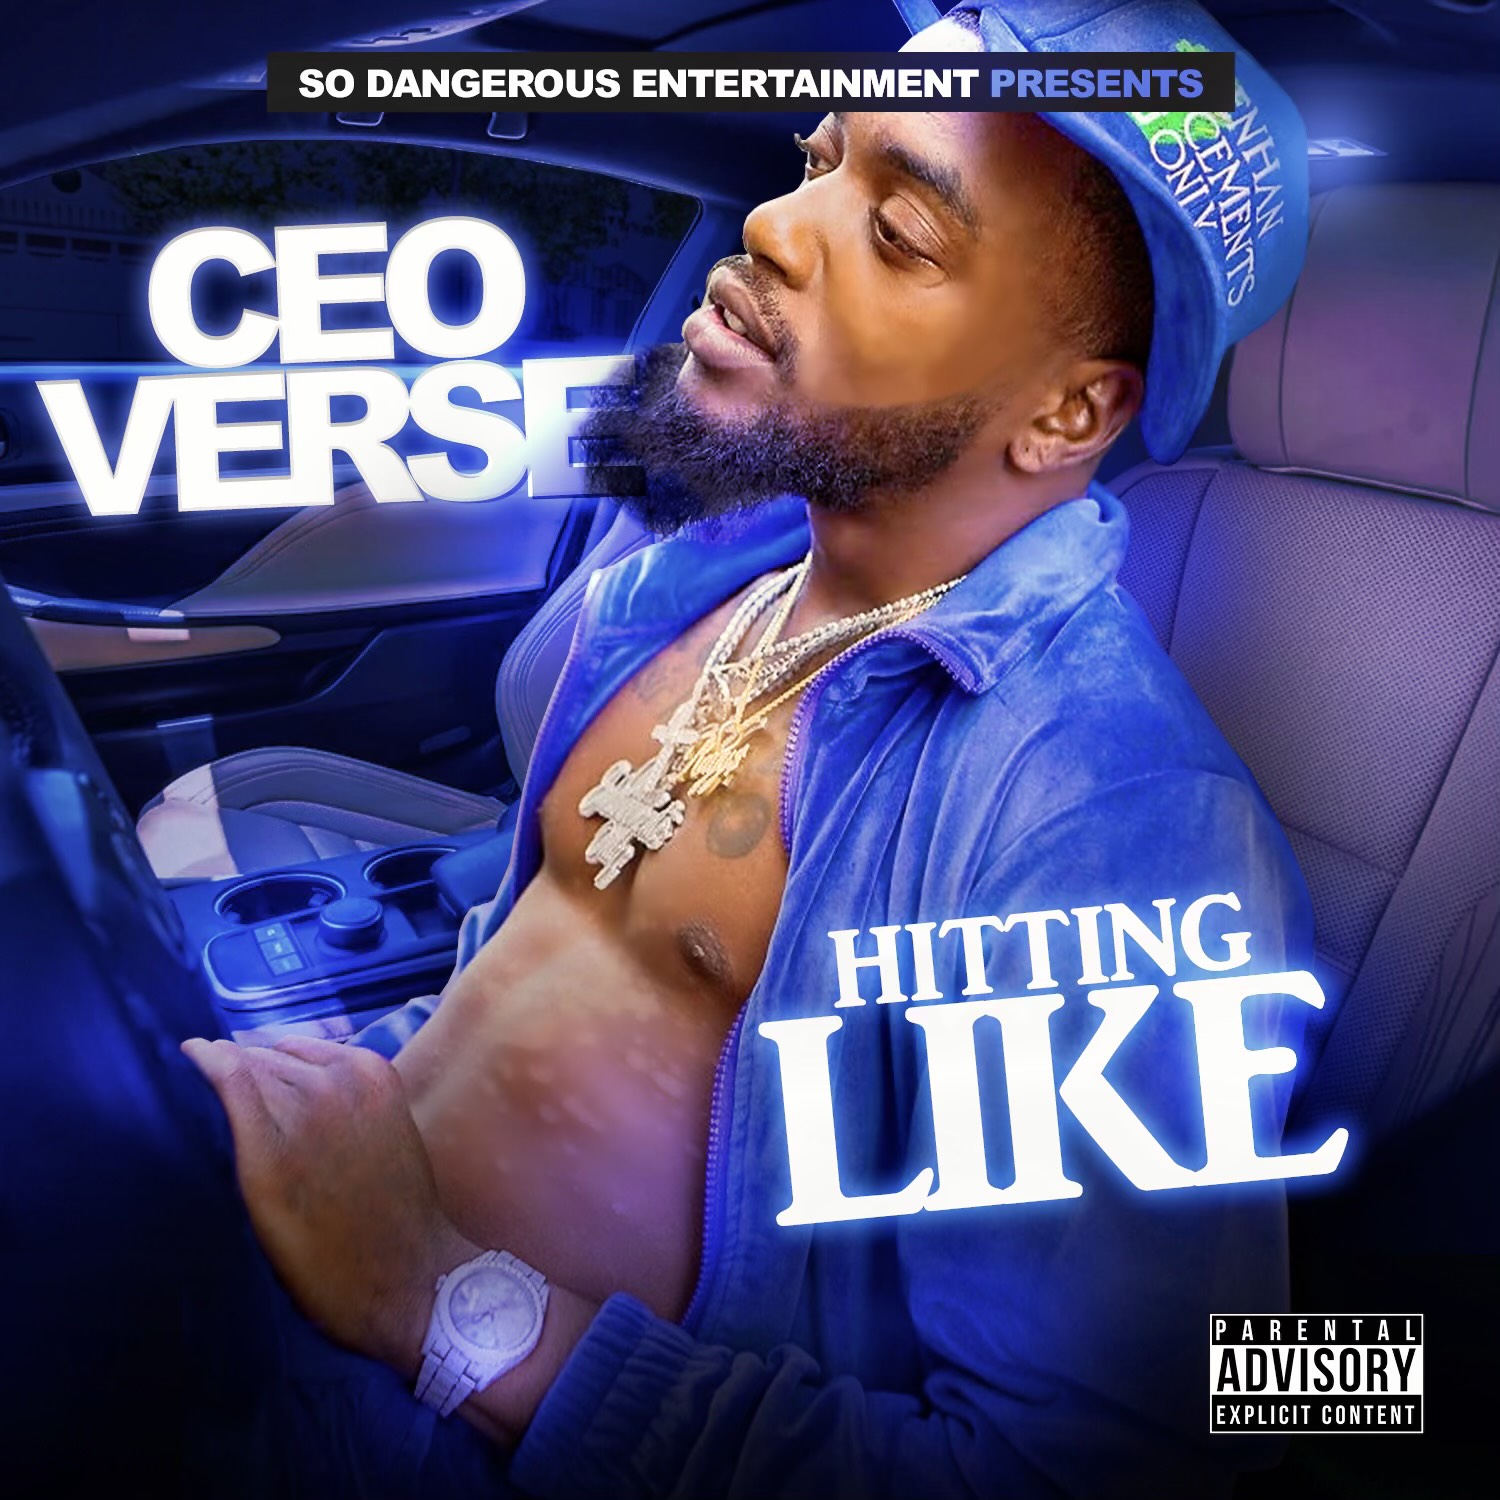 CEO Verse sets his eyes on the Strip clubs with new single “Hittin Like” @we_inverseworld